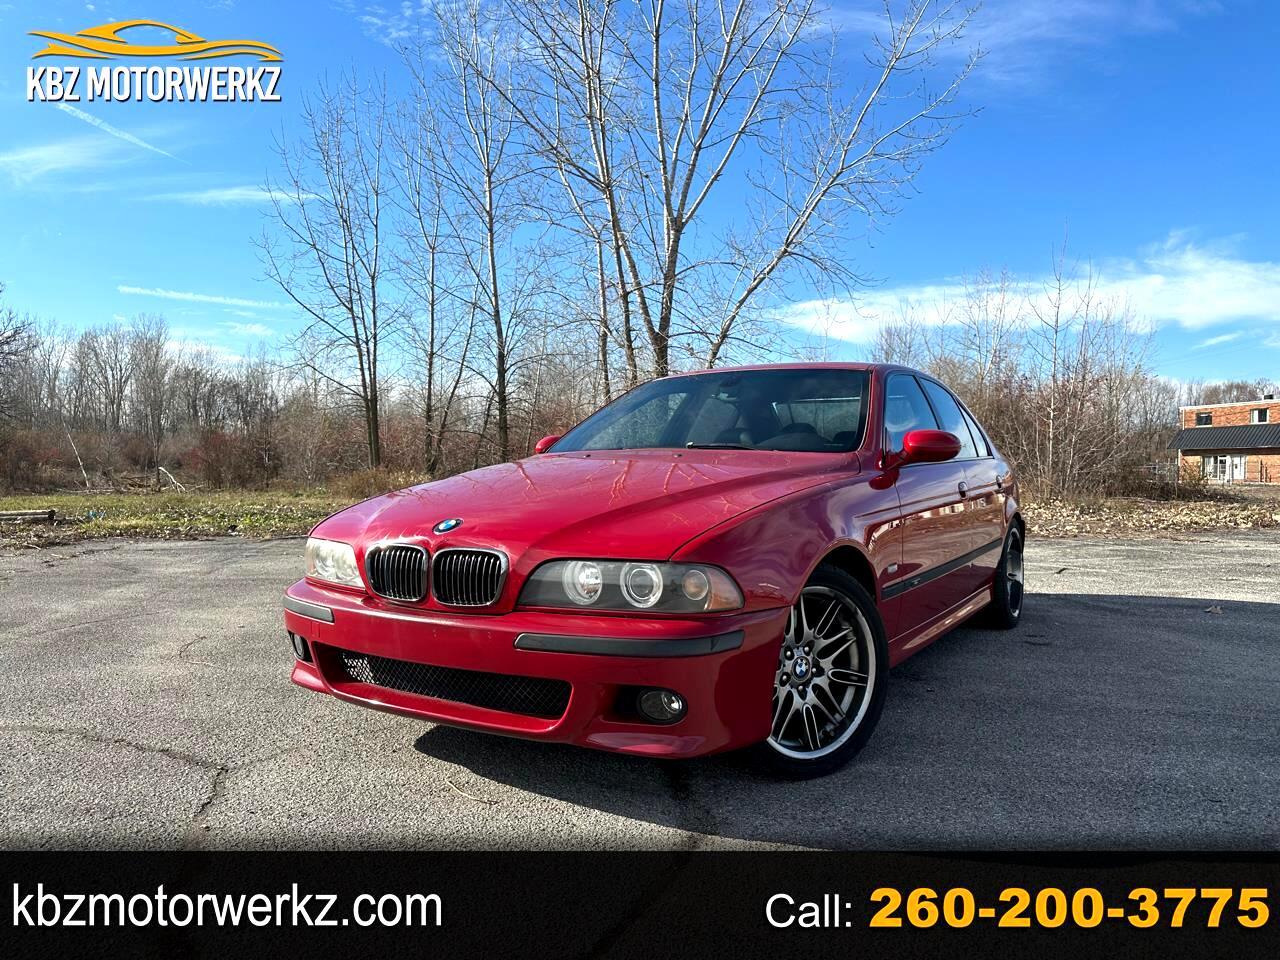 For Sale: 2000 BMW M5 in Fort Wayne, Indiana for sale in Fort Wayne, IN